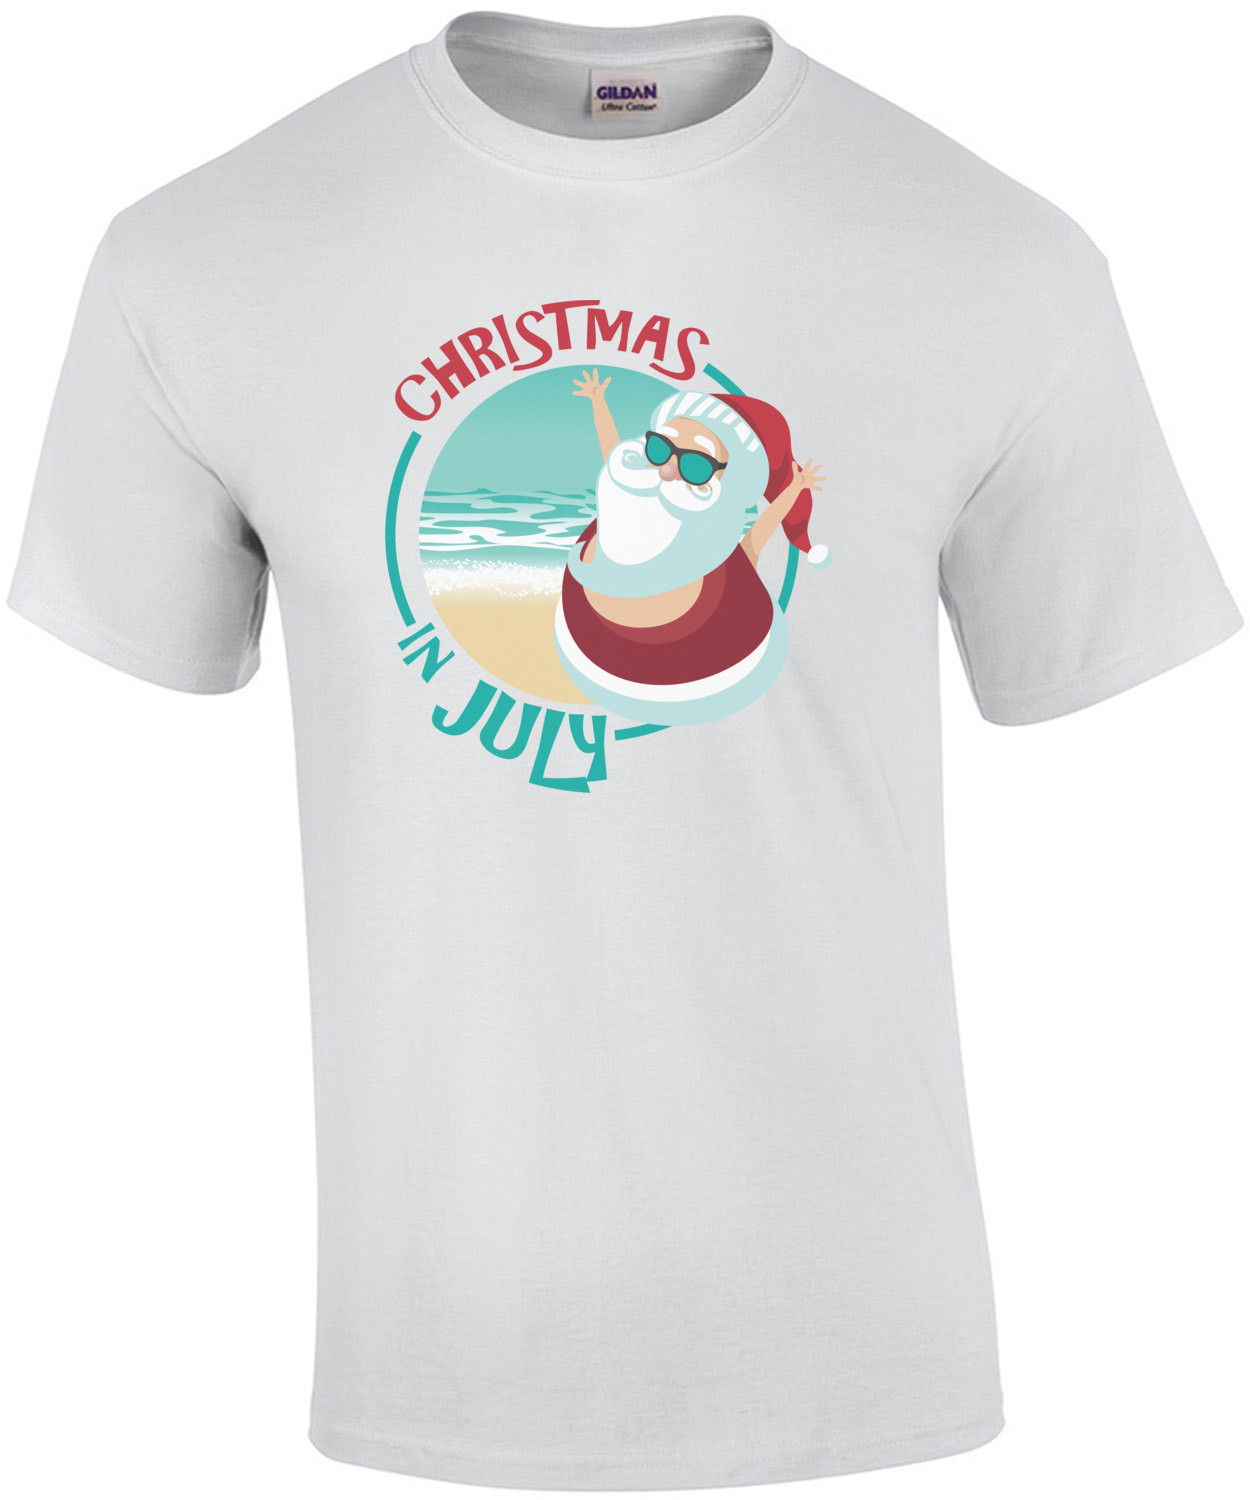 Christmas In July - Christmas T-Shirt